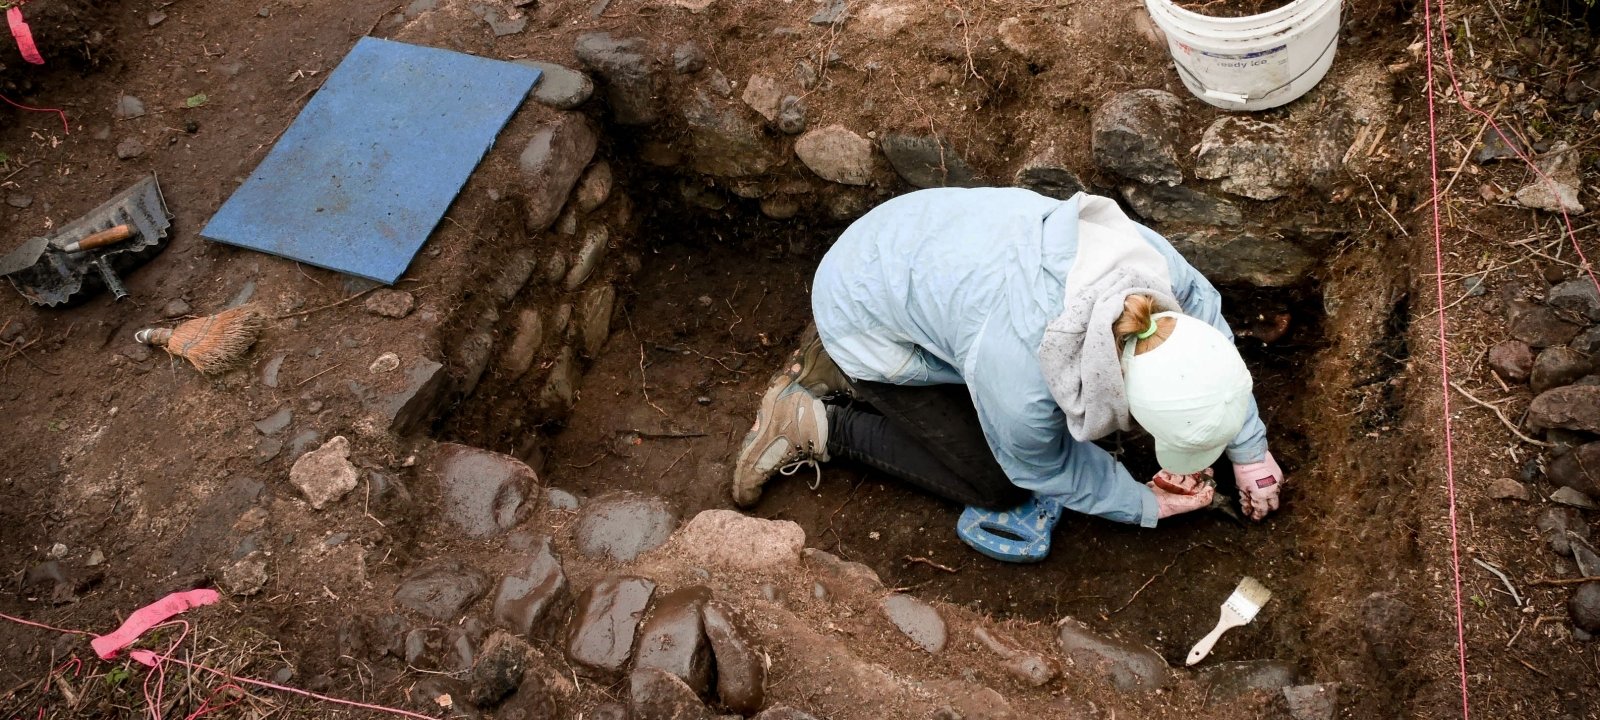 Industrial Archaeology student working in a rectangular dig site.